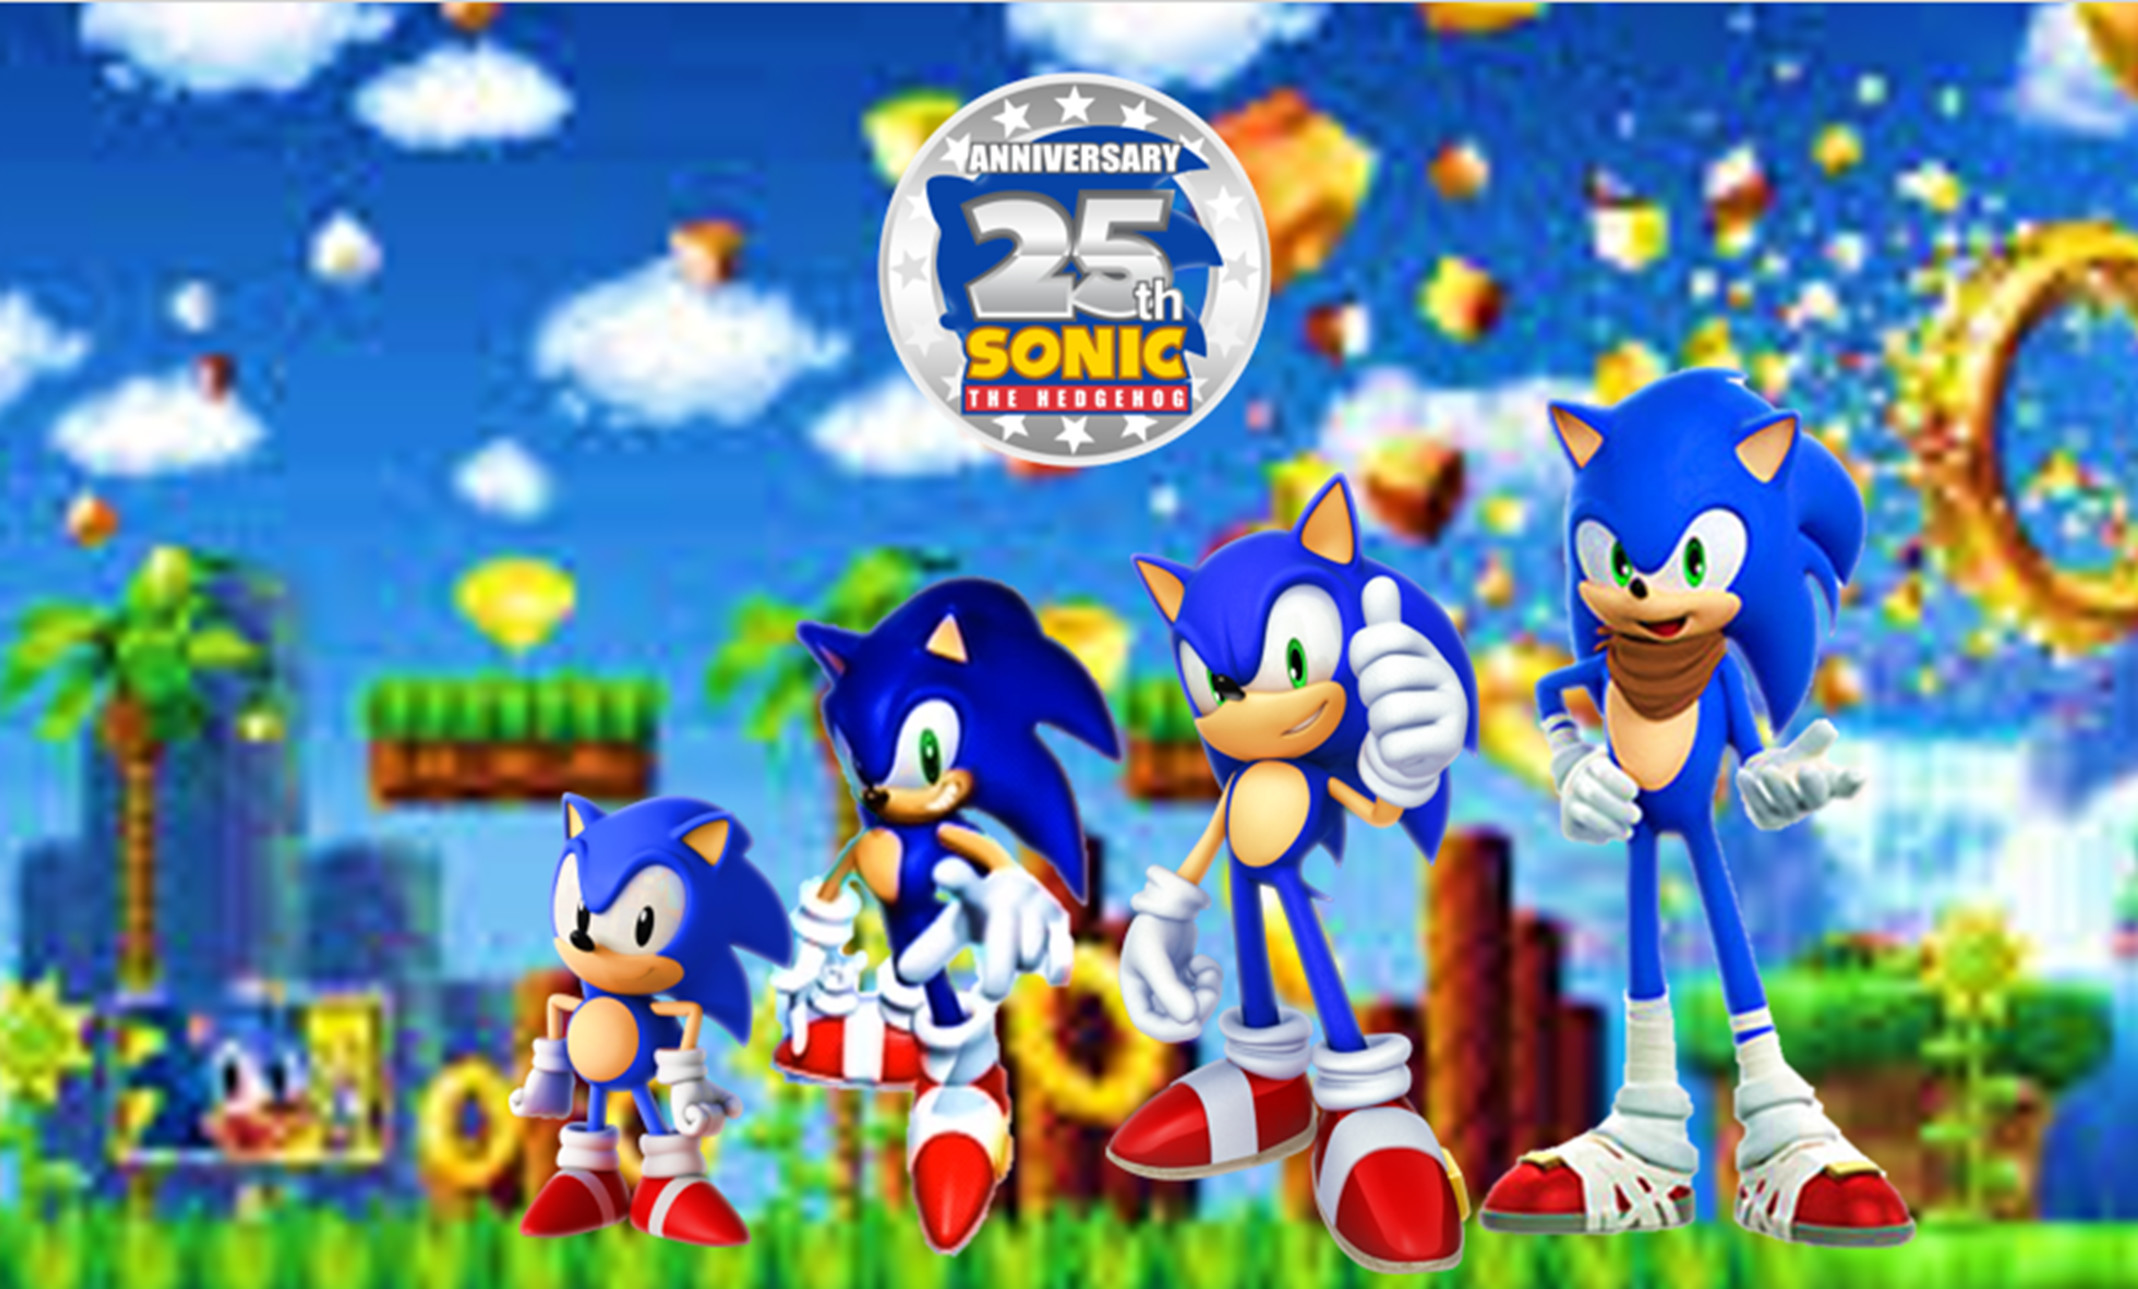 2138x1289 Sonic the Hedgehog images 25th Anniversary of Sonic the Hedgehog HD  wallpaper and background photos